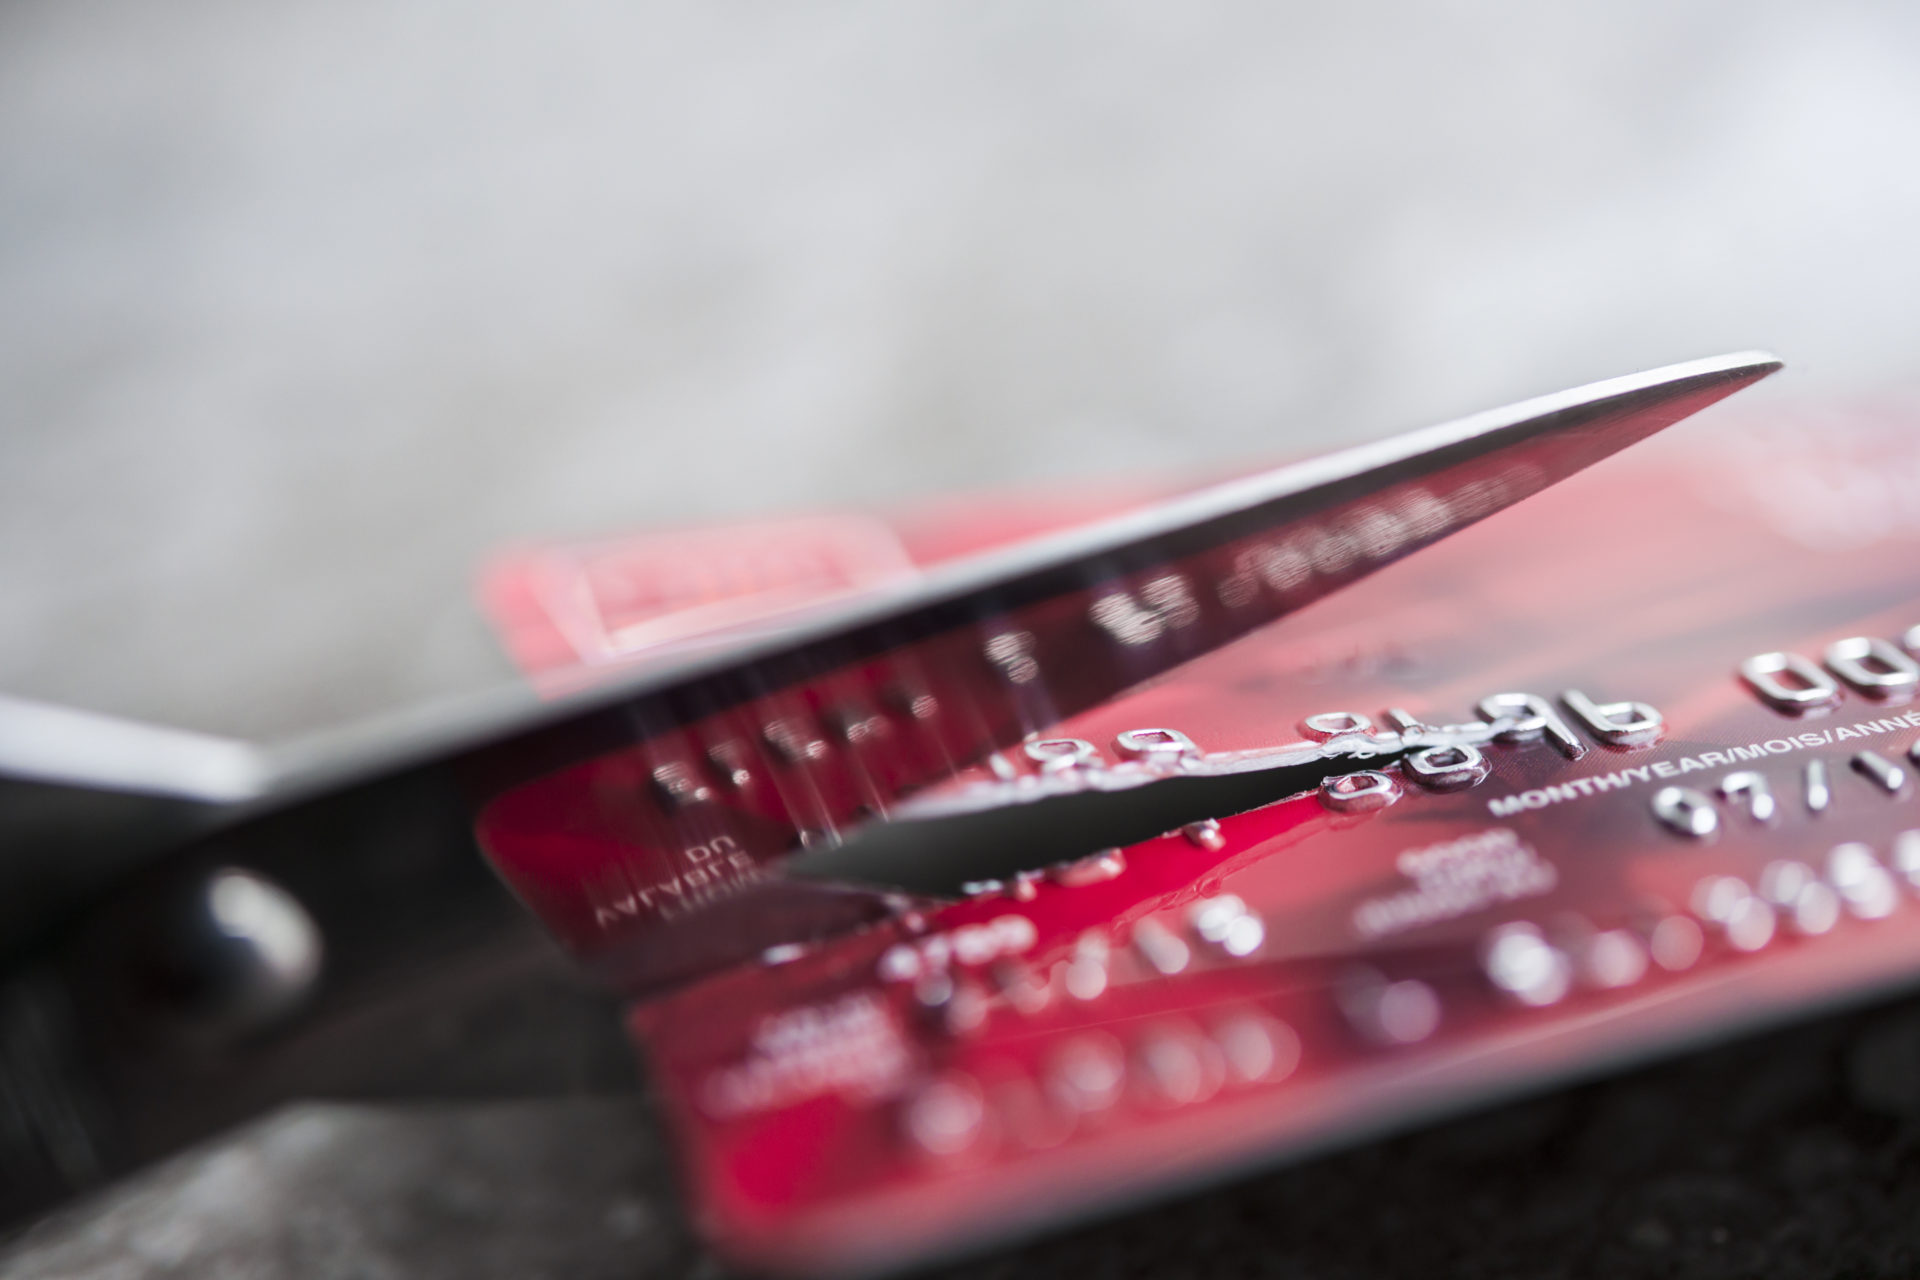 Bitcoin Could Make Credit Cards Obsolete